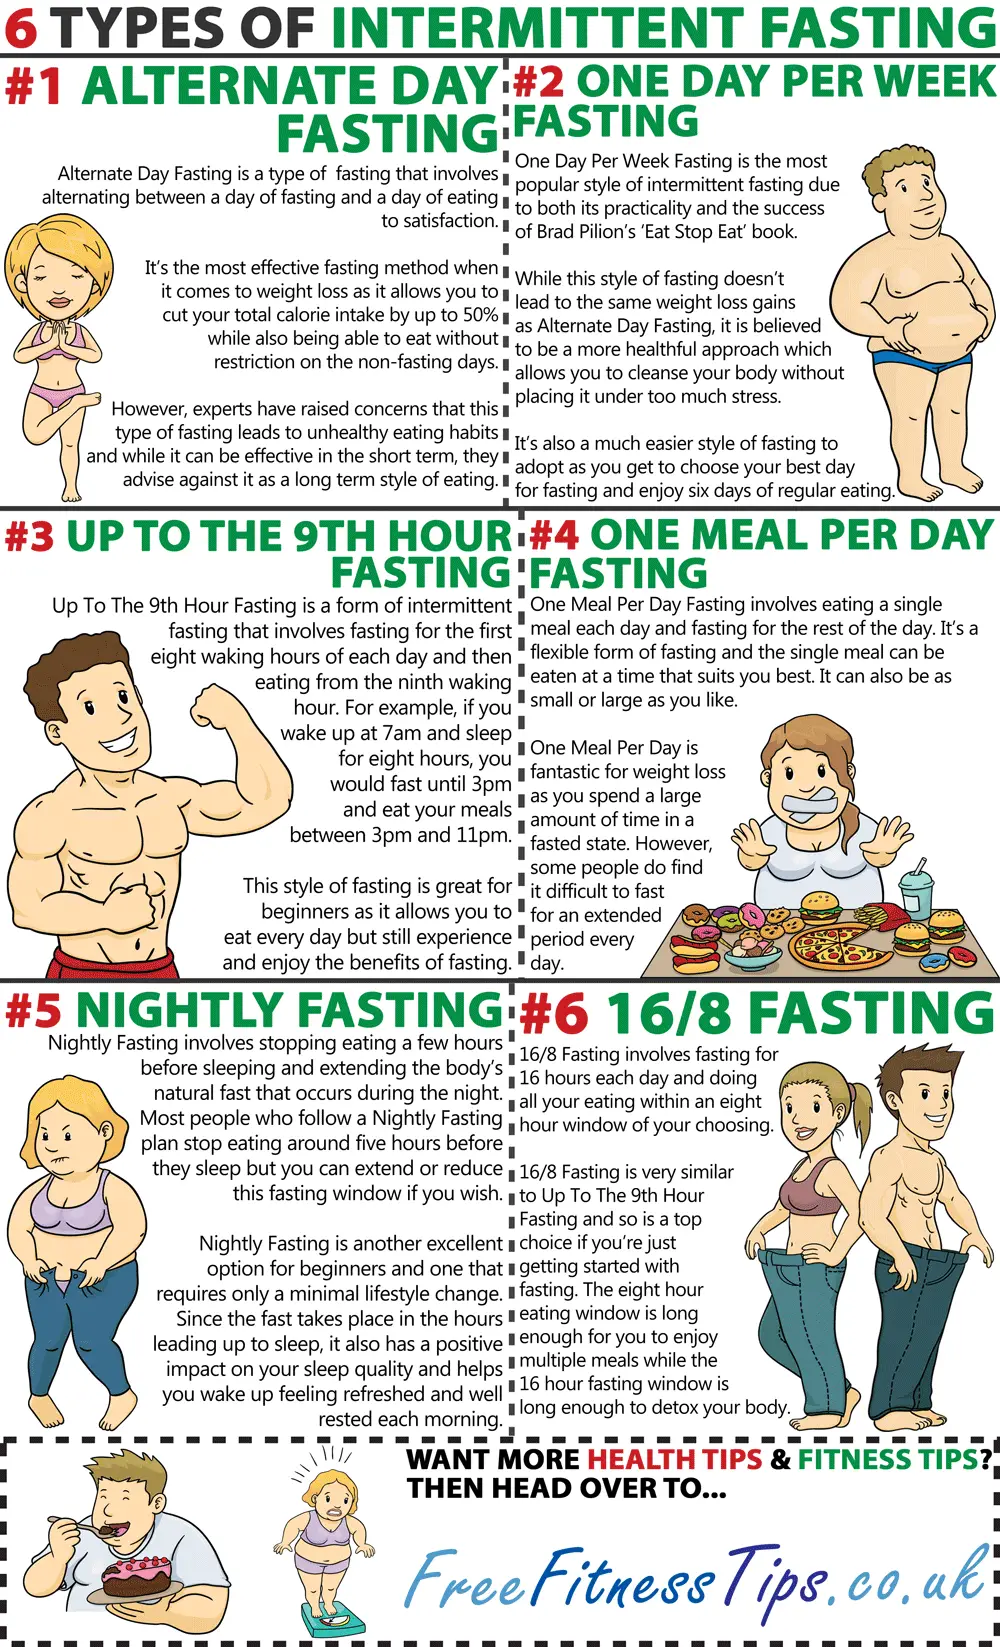 6 Types Of Intermittent Fasting